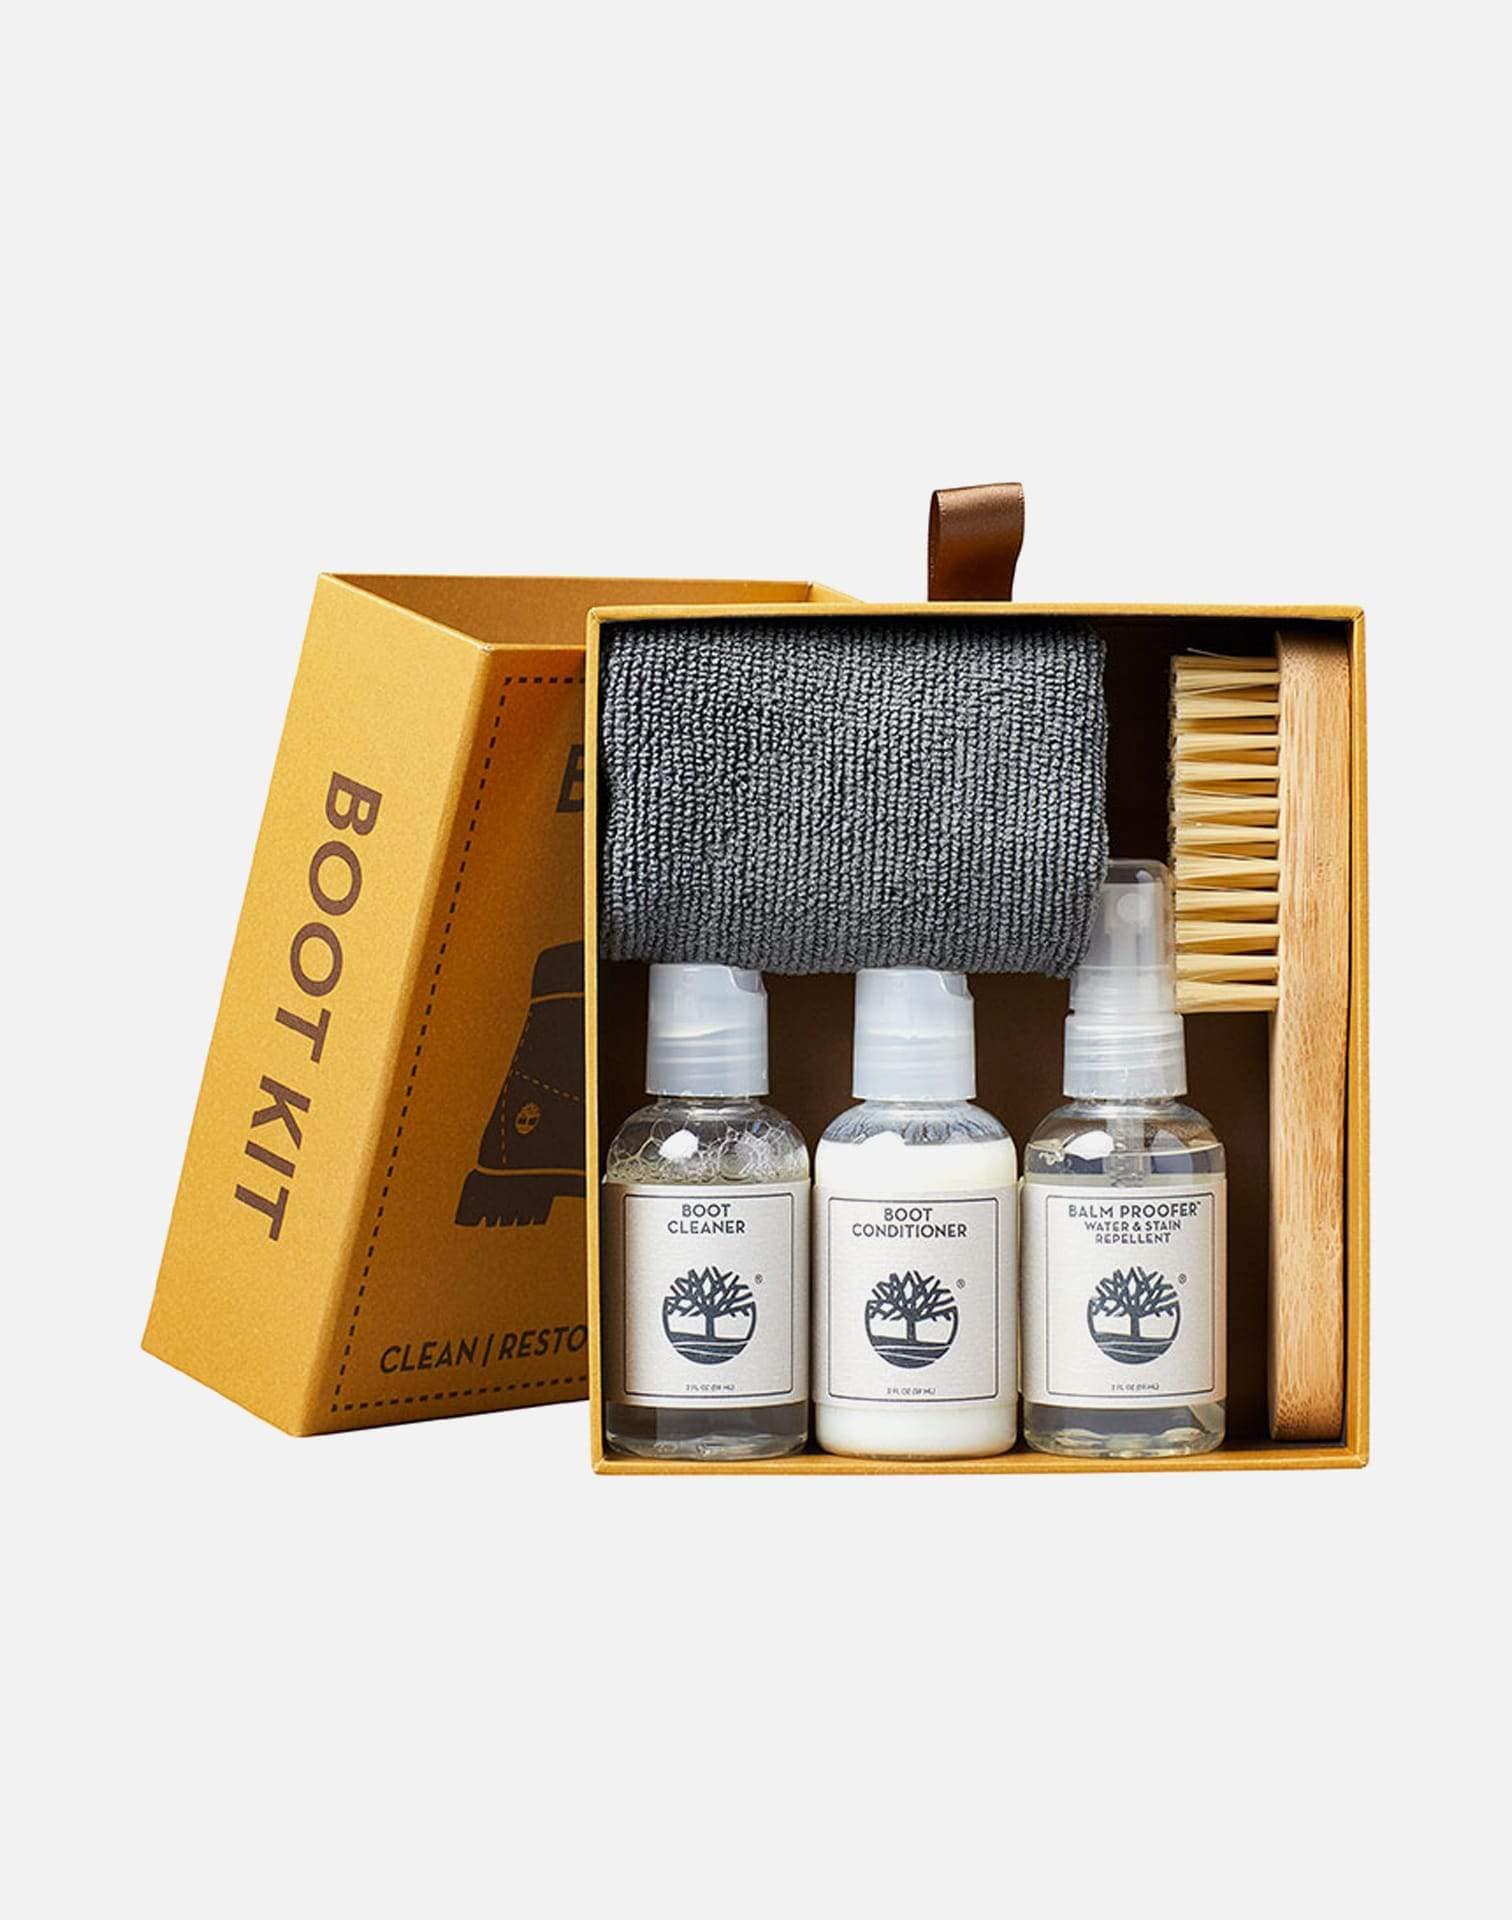 timberland shoe cleaning kit